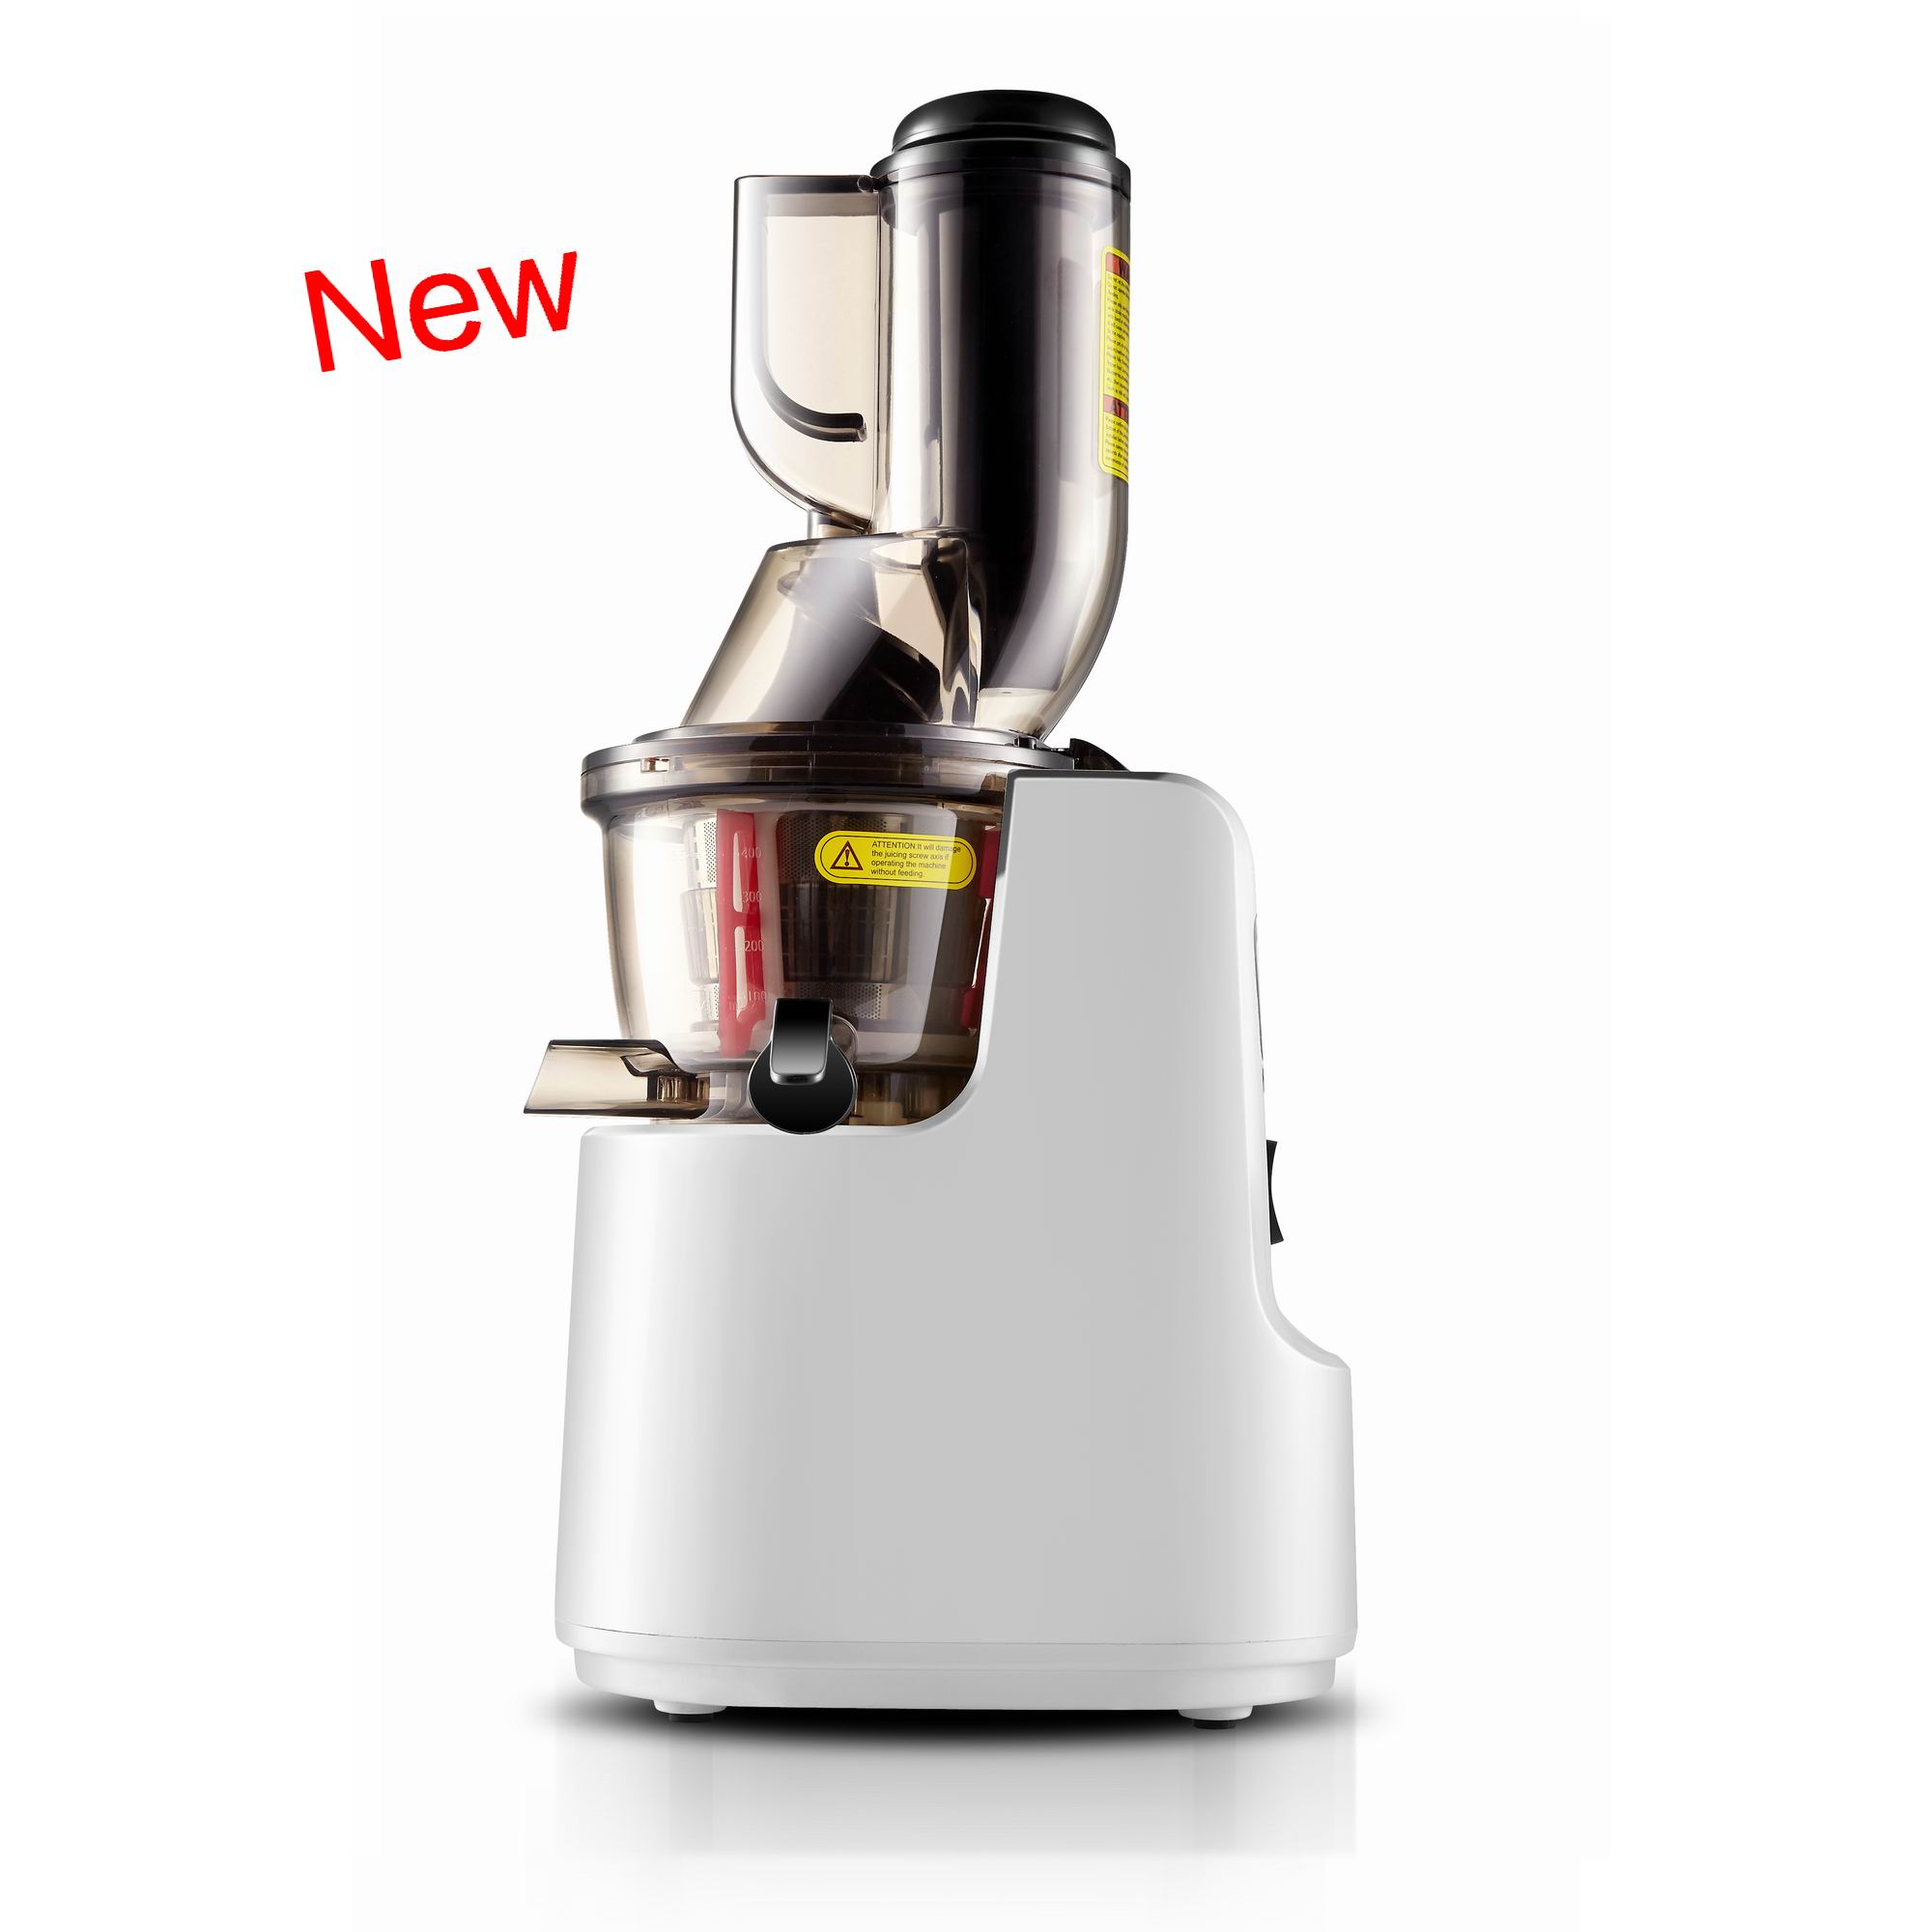 2016 New slow juicer with good price,good quality